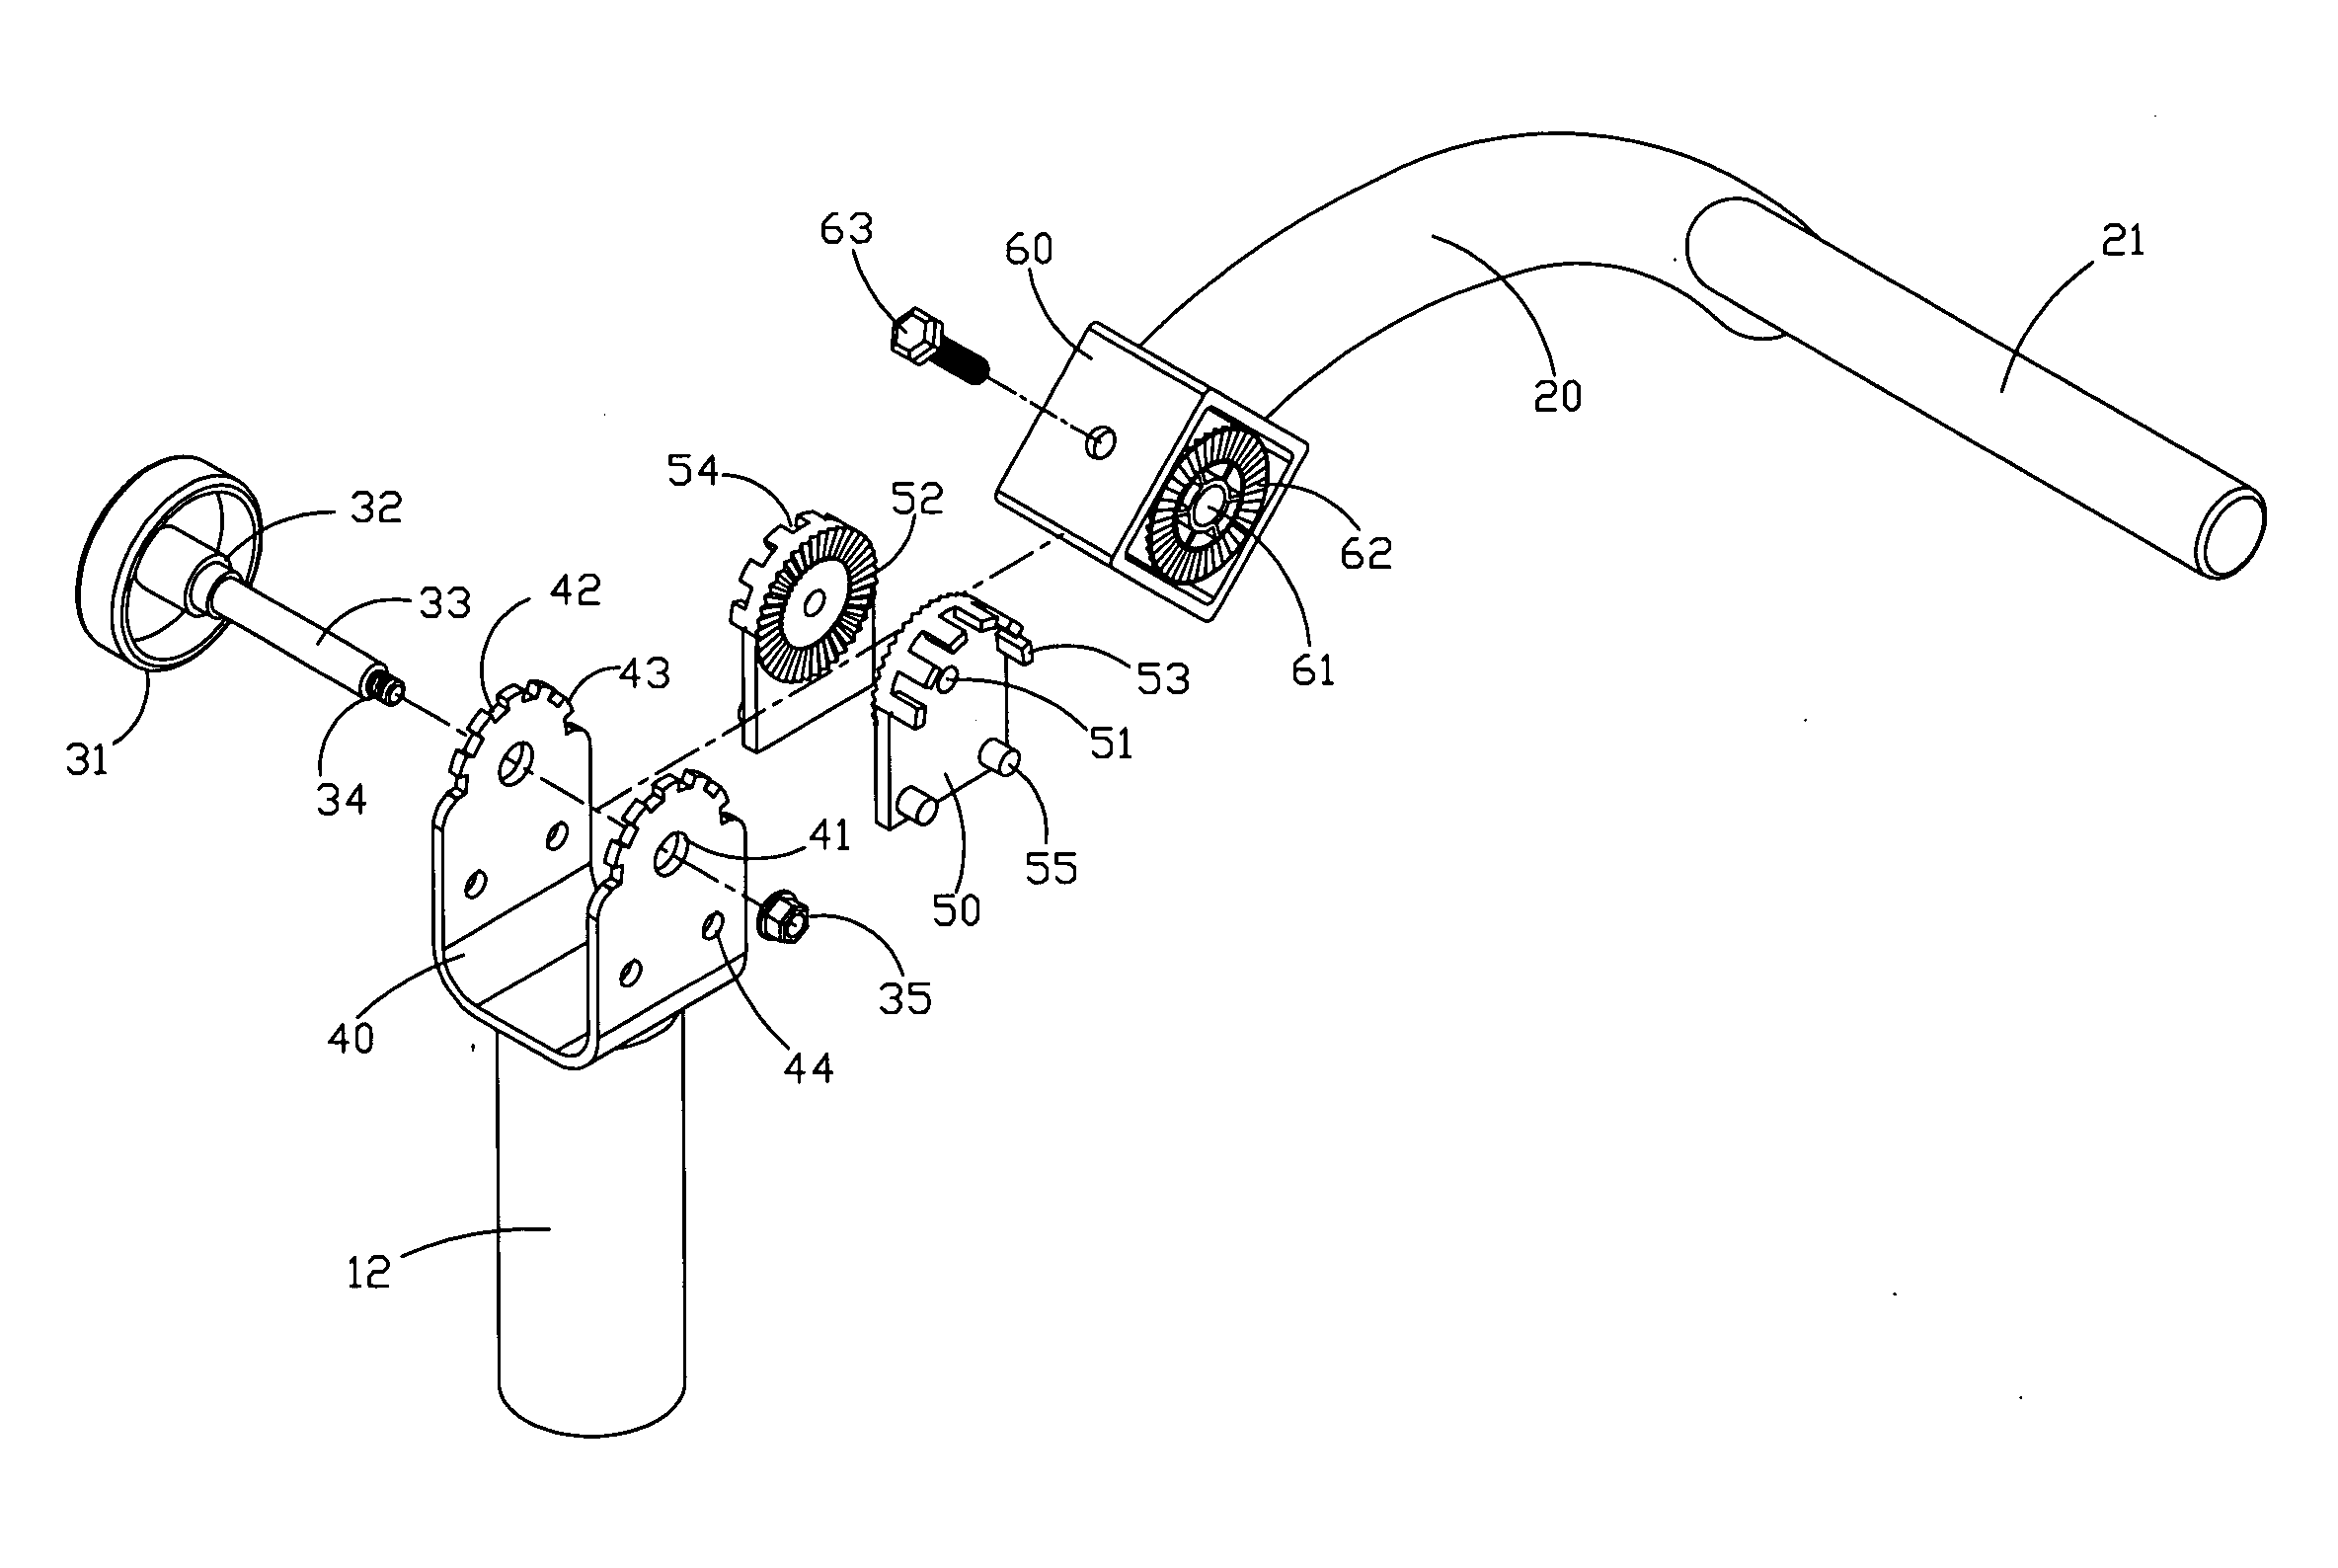 Adjustable handle support of an exercise apparatus